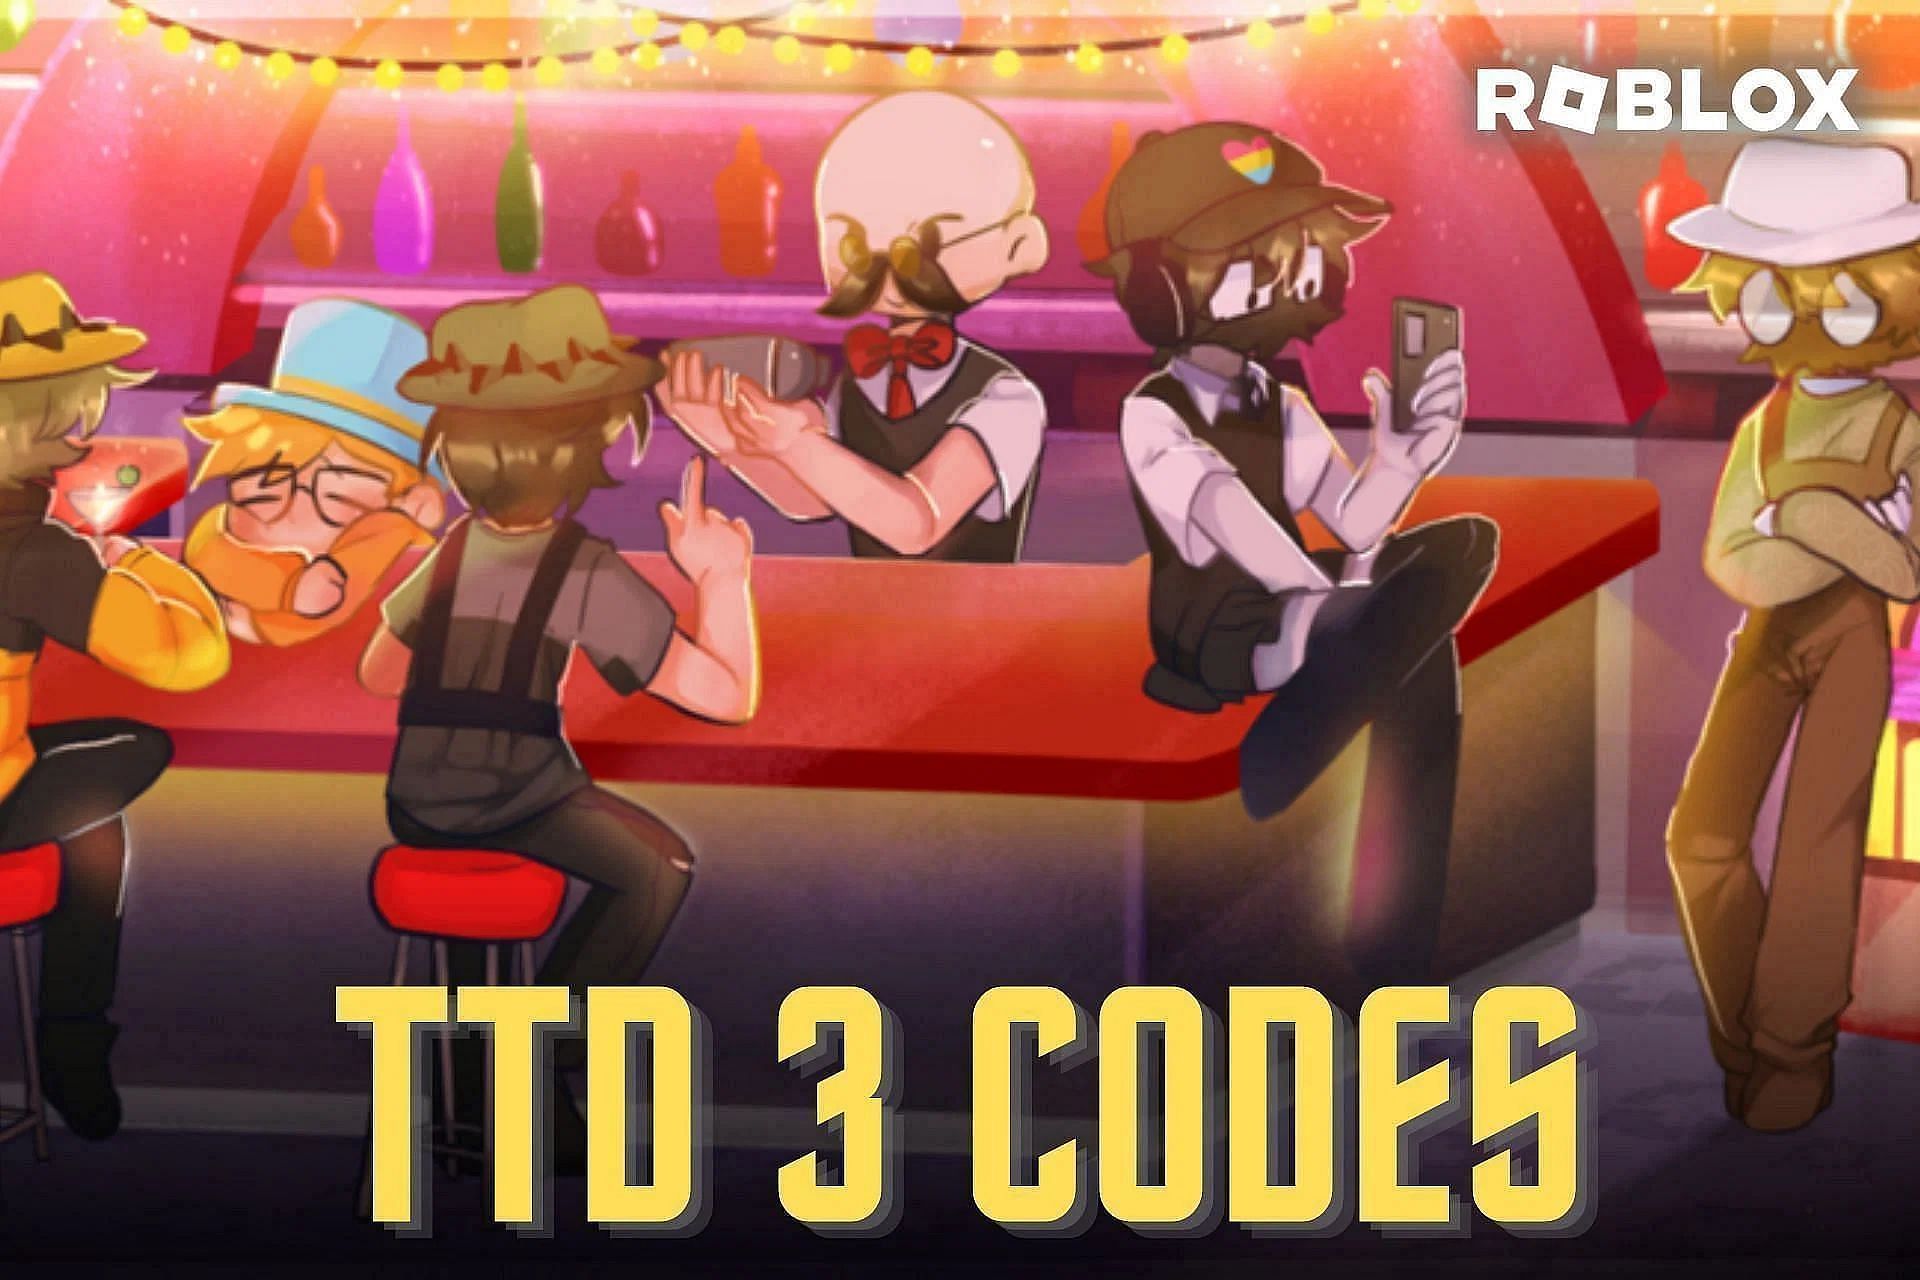 Featured image of TTD 3 codes (Image via Roblox and Sportskeeda)